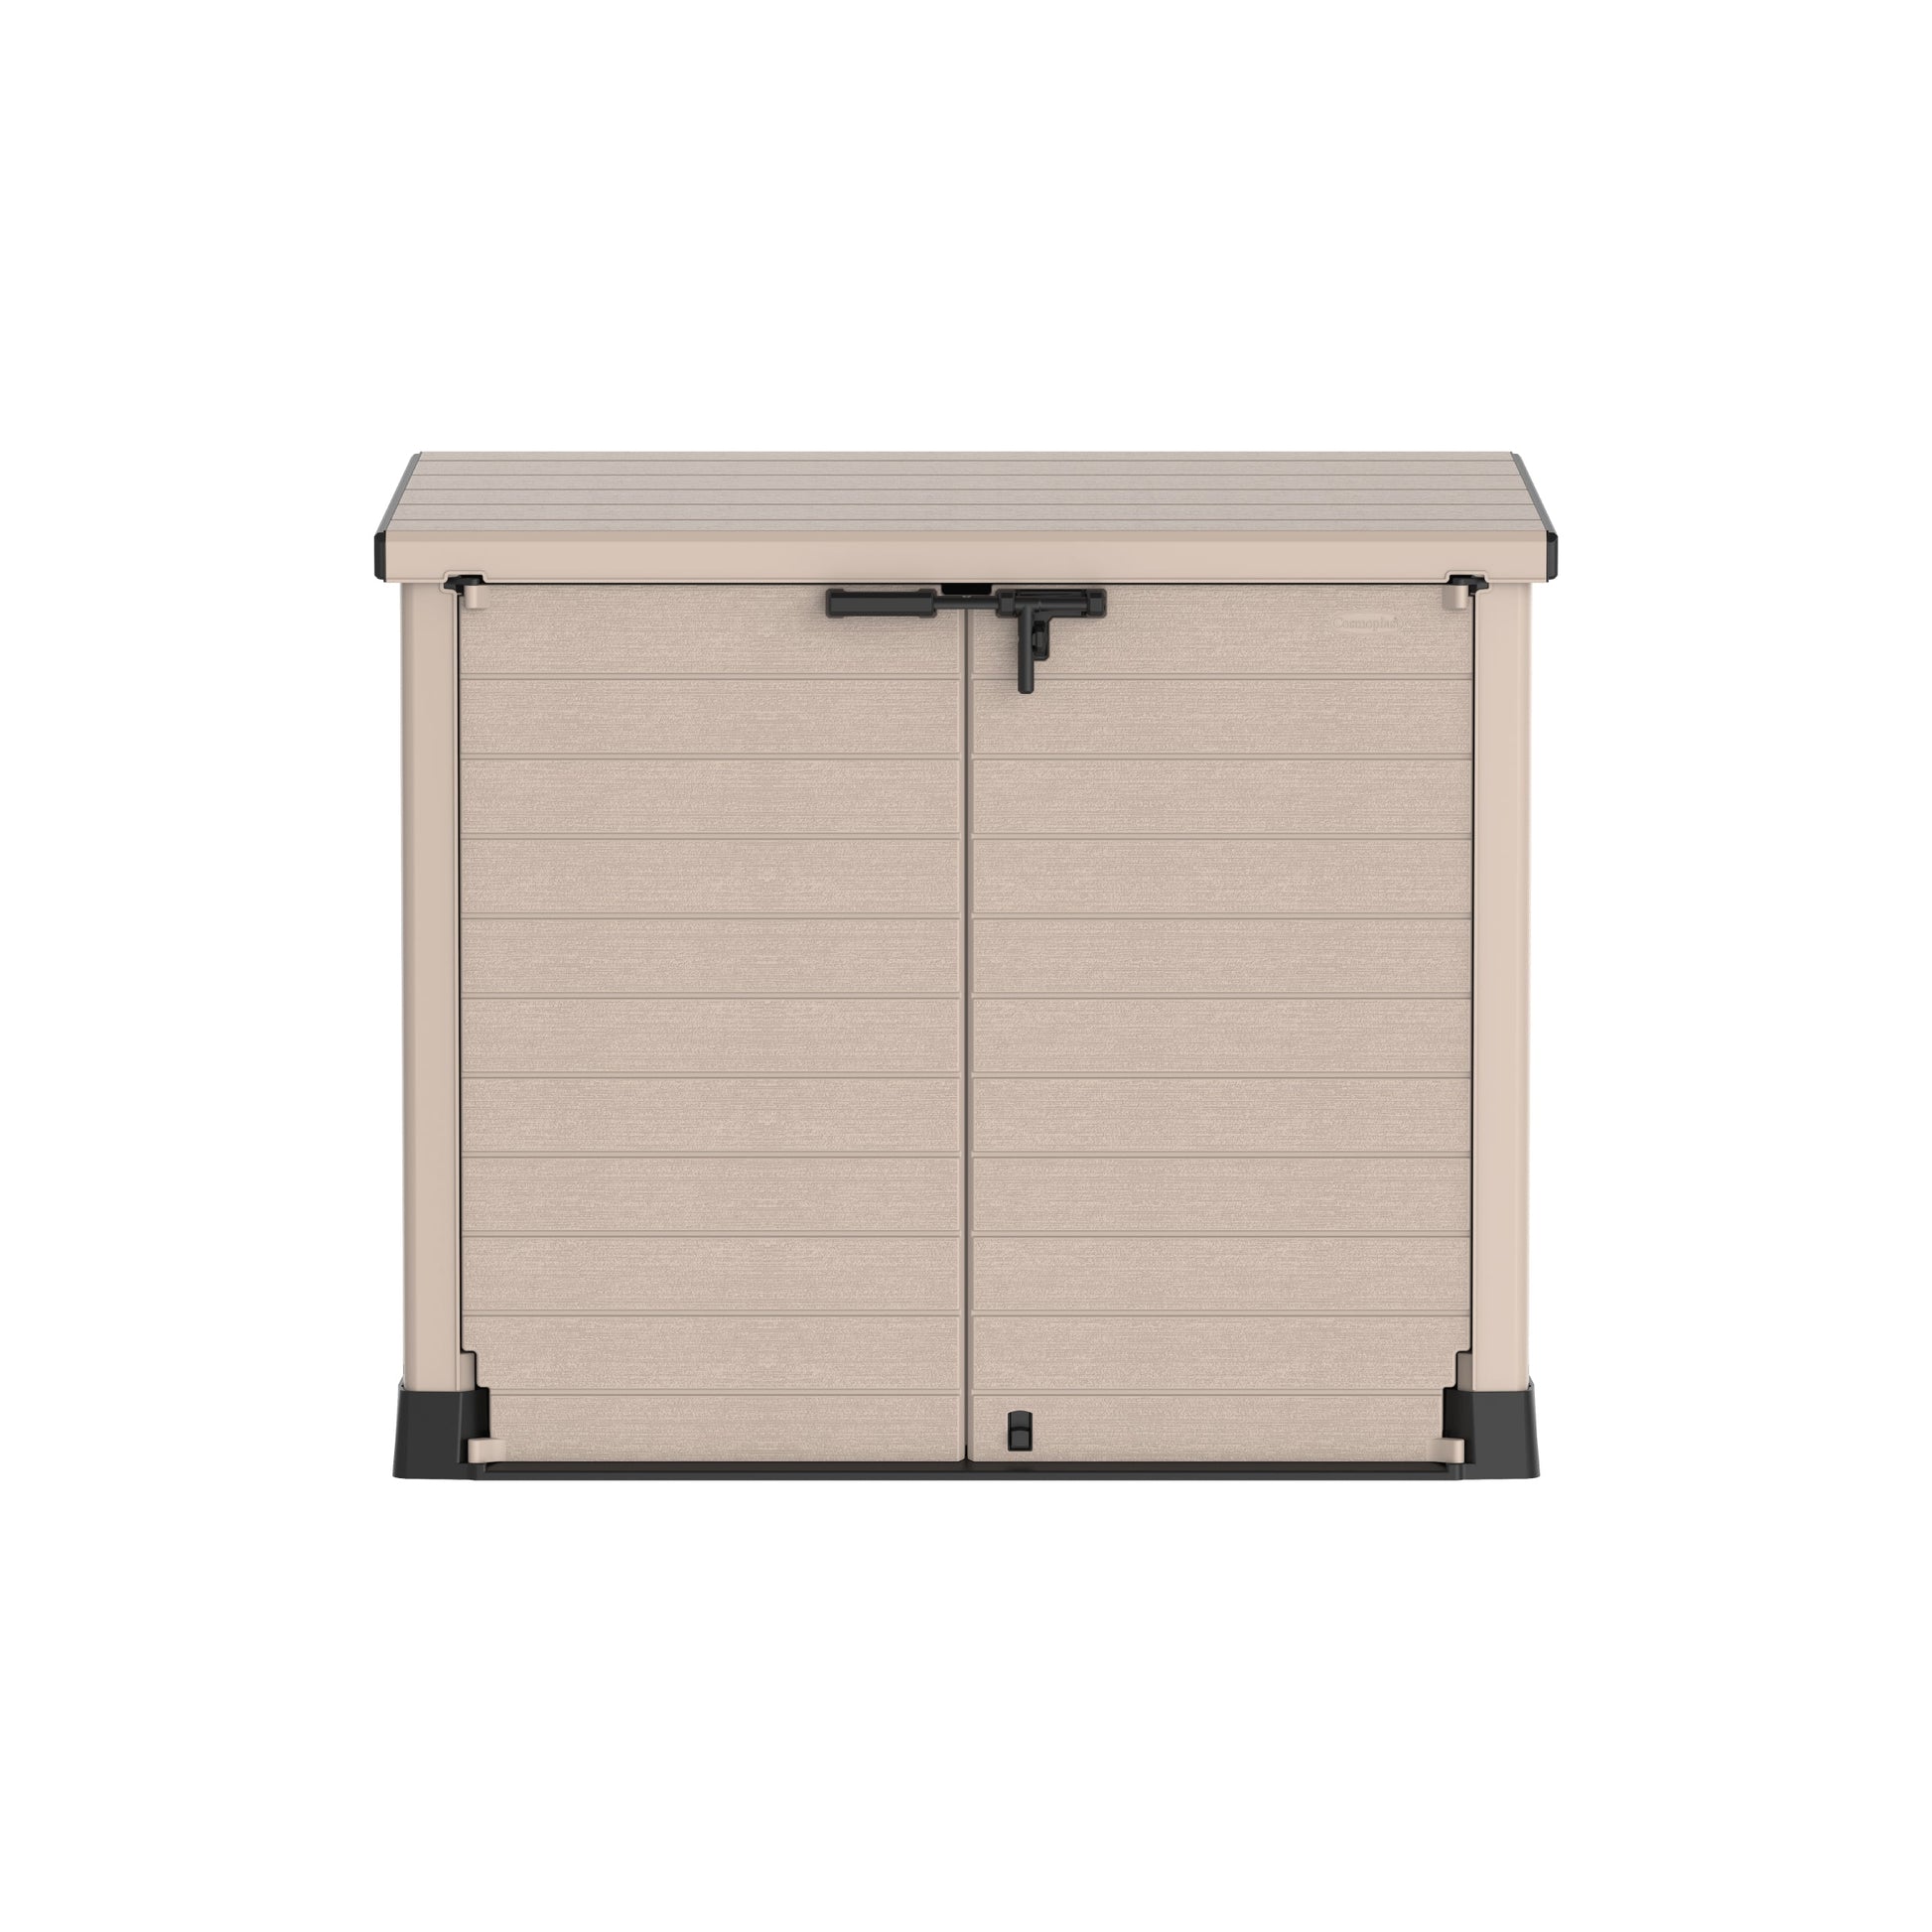 Cedargrain 1200L Small Storage Shed with Flat Lid - Cosmoplast Bahrain